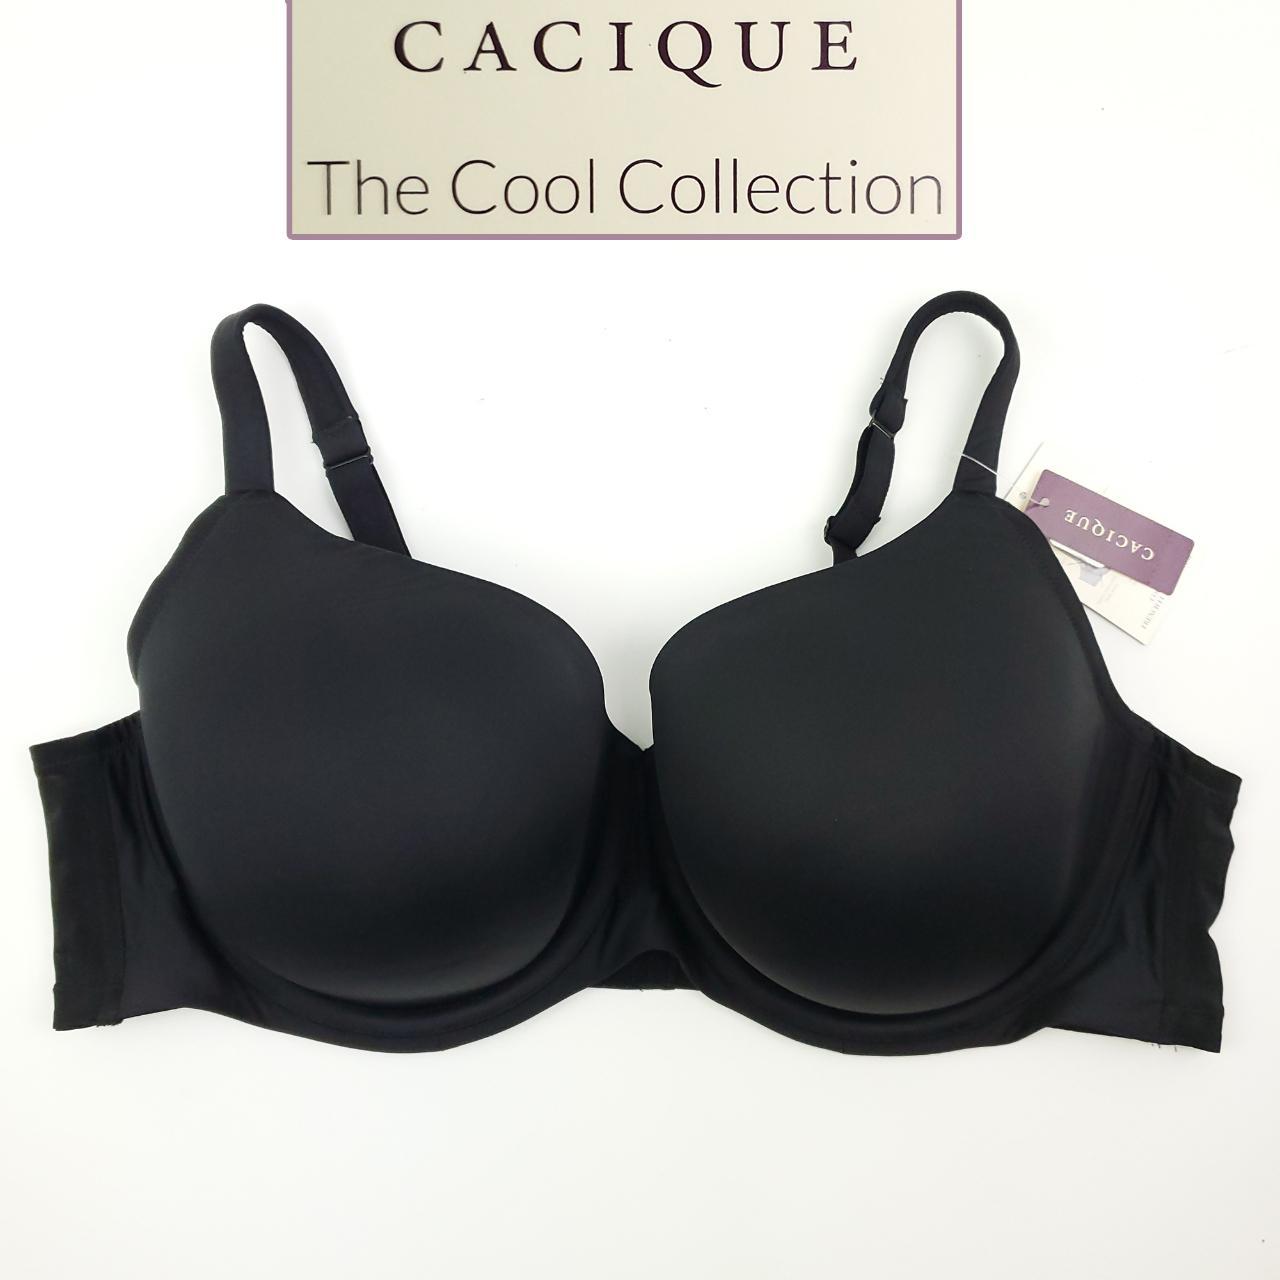 Cacique Cool Collection Bra 46D French Full Coverage Underwire